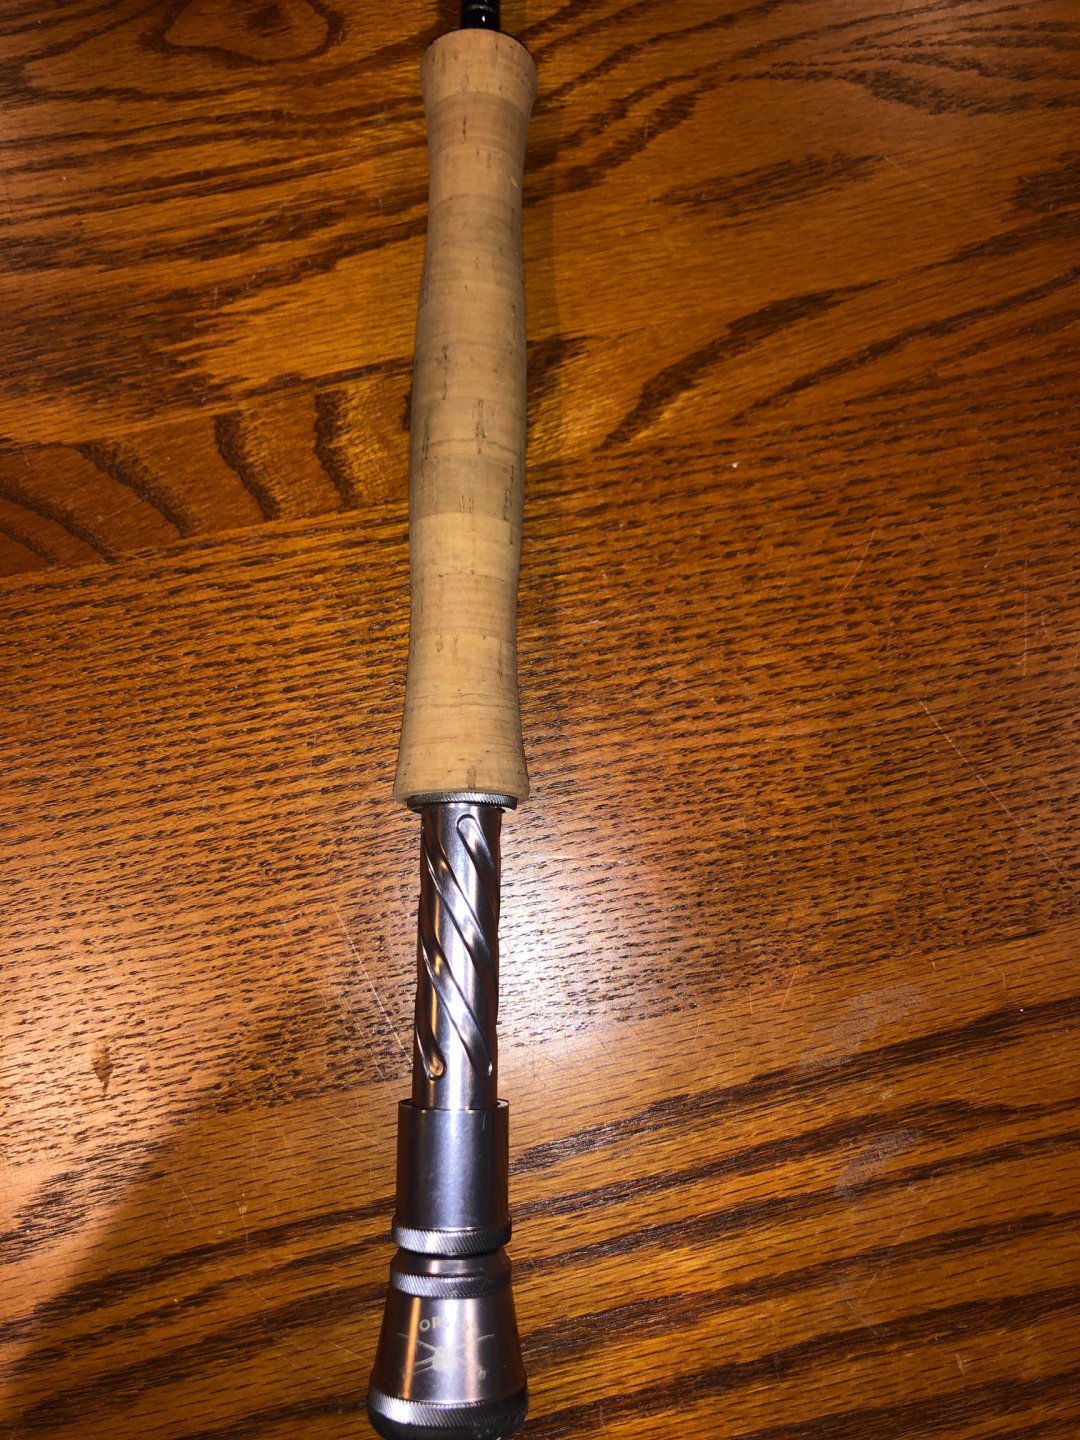 Orvis T3 9' 9wt 2 Piece Fly Rod - Non Hunting Items For Sale and